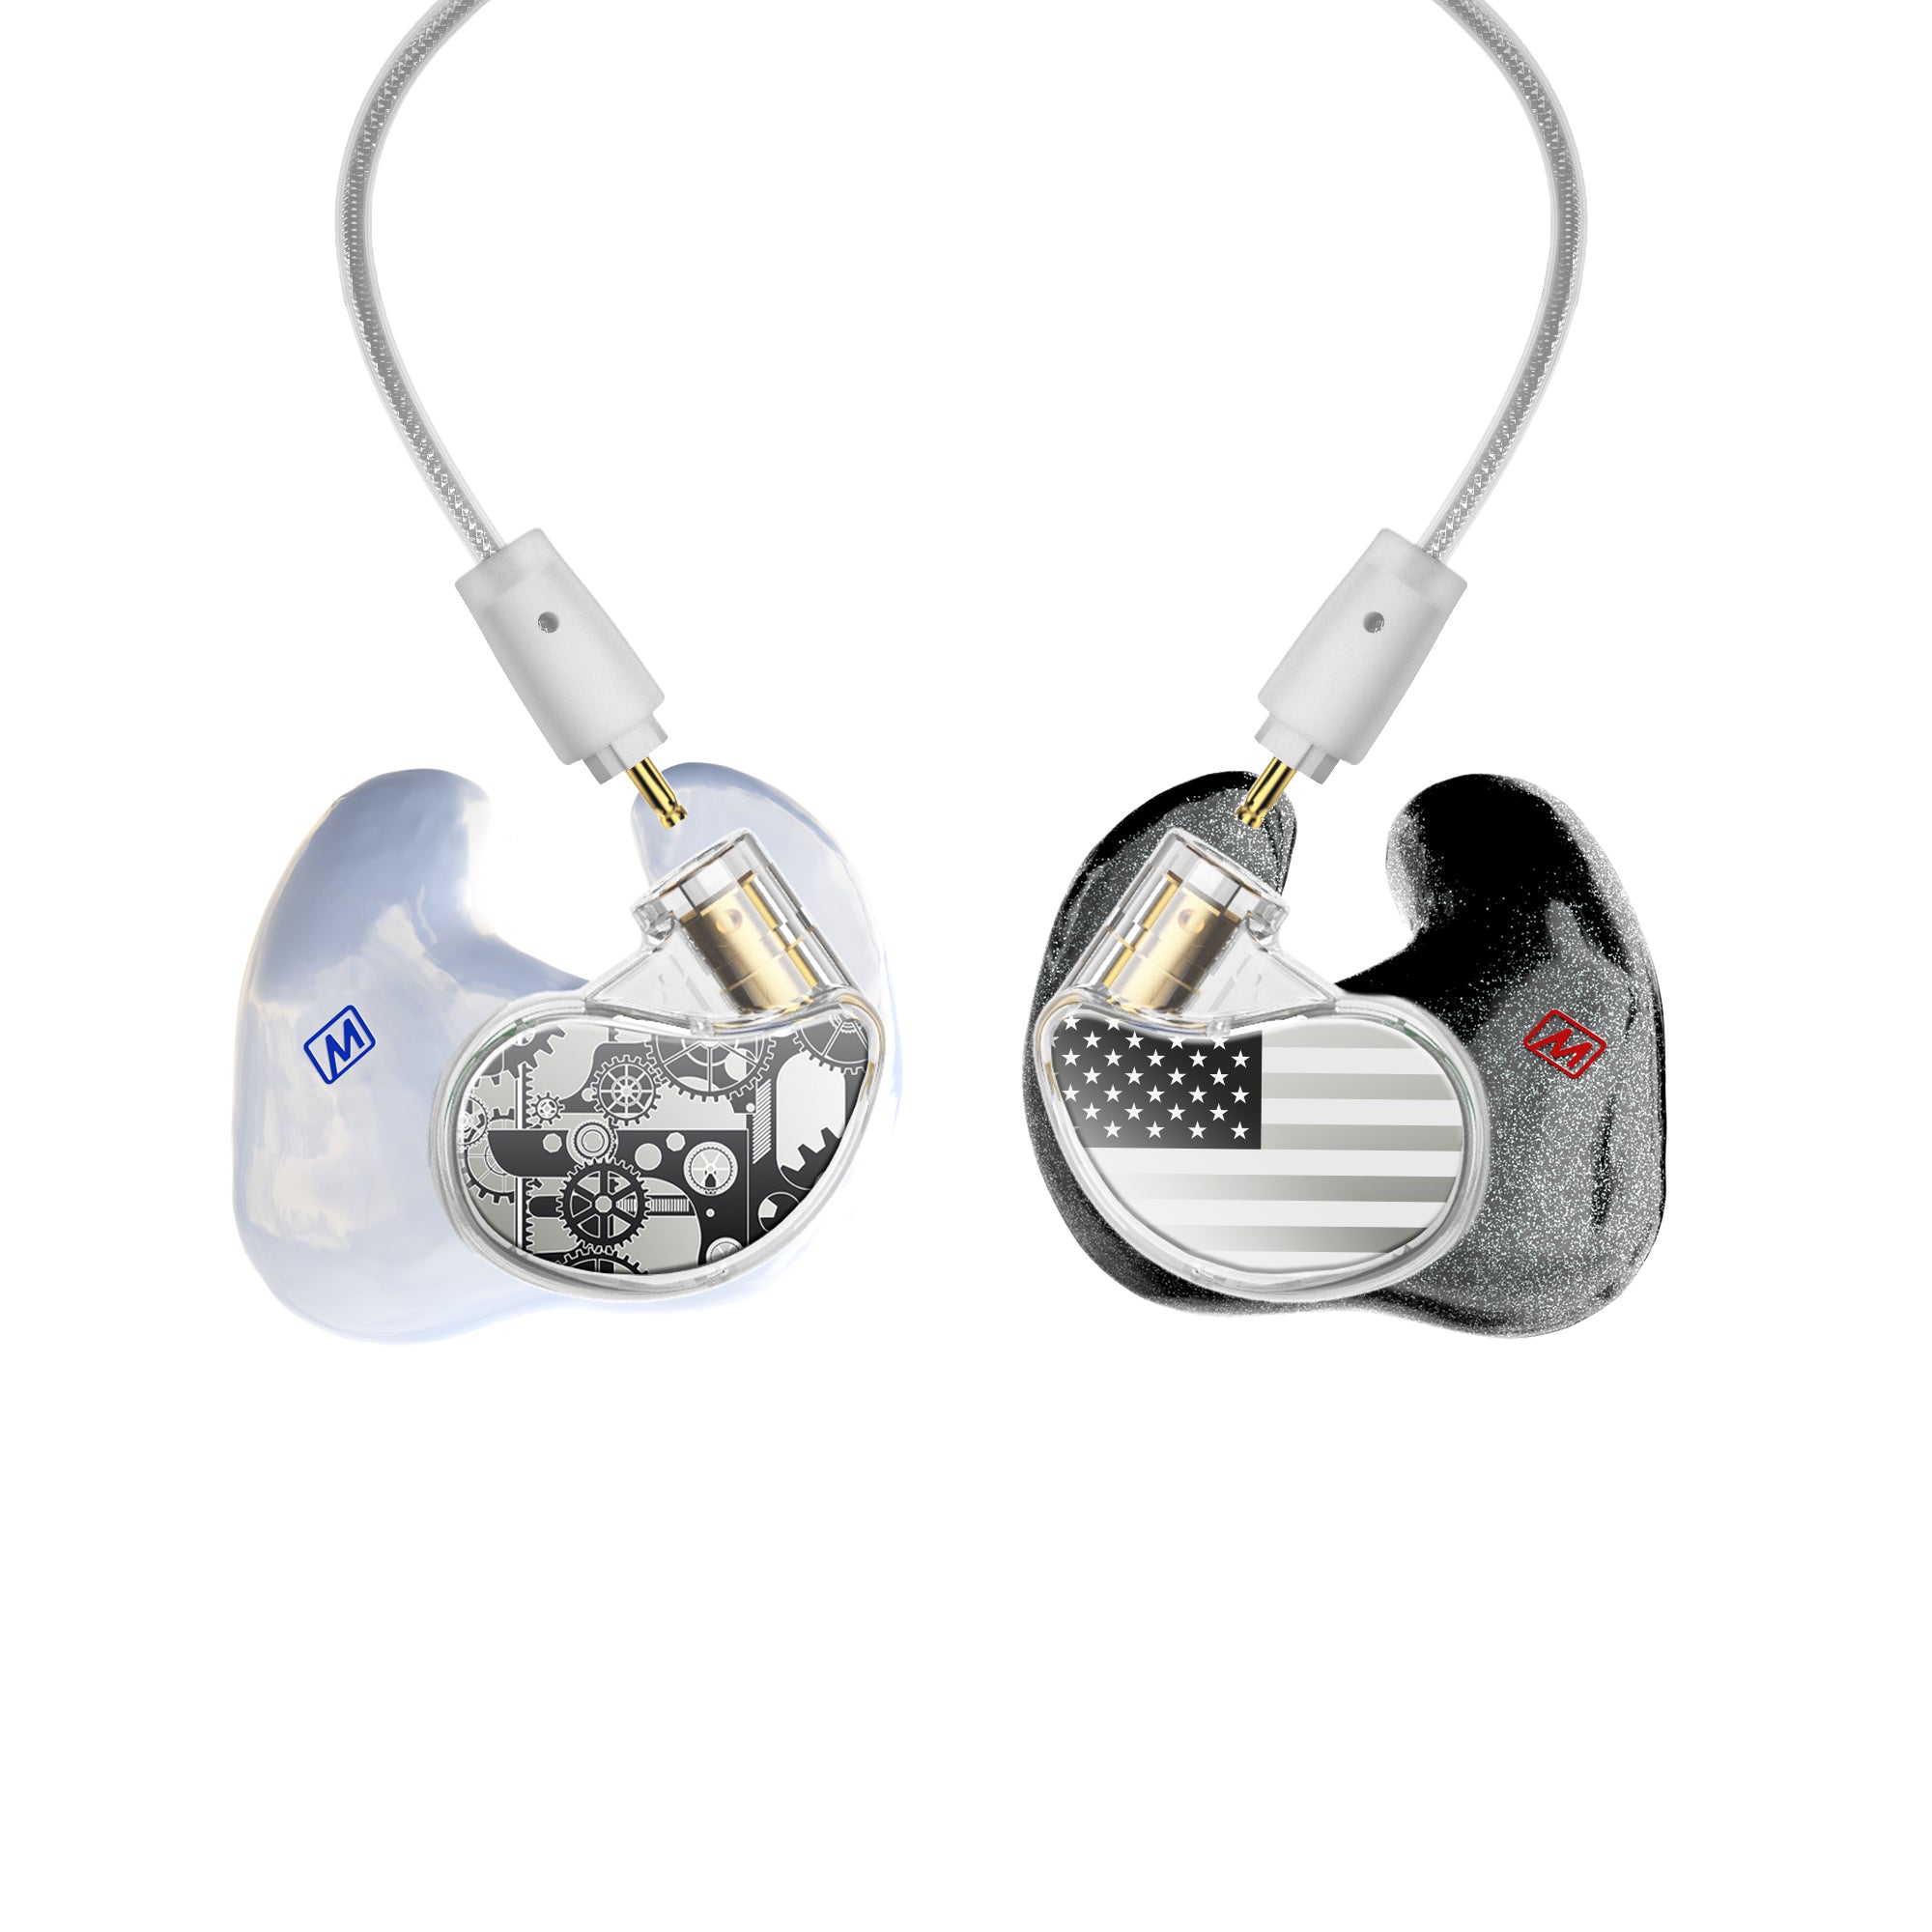 Image of Design Your Own: Custom M6 Pro In-Ear Monitors.